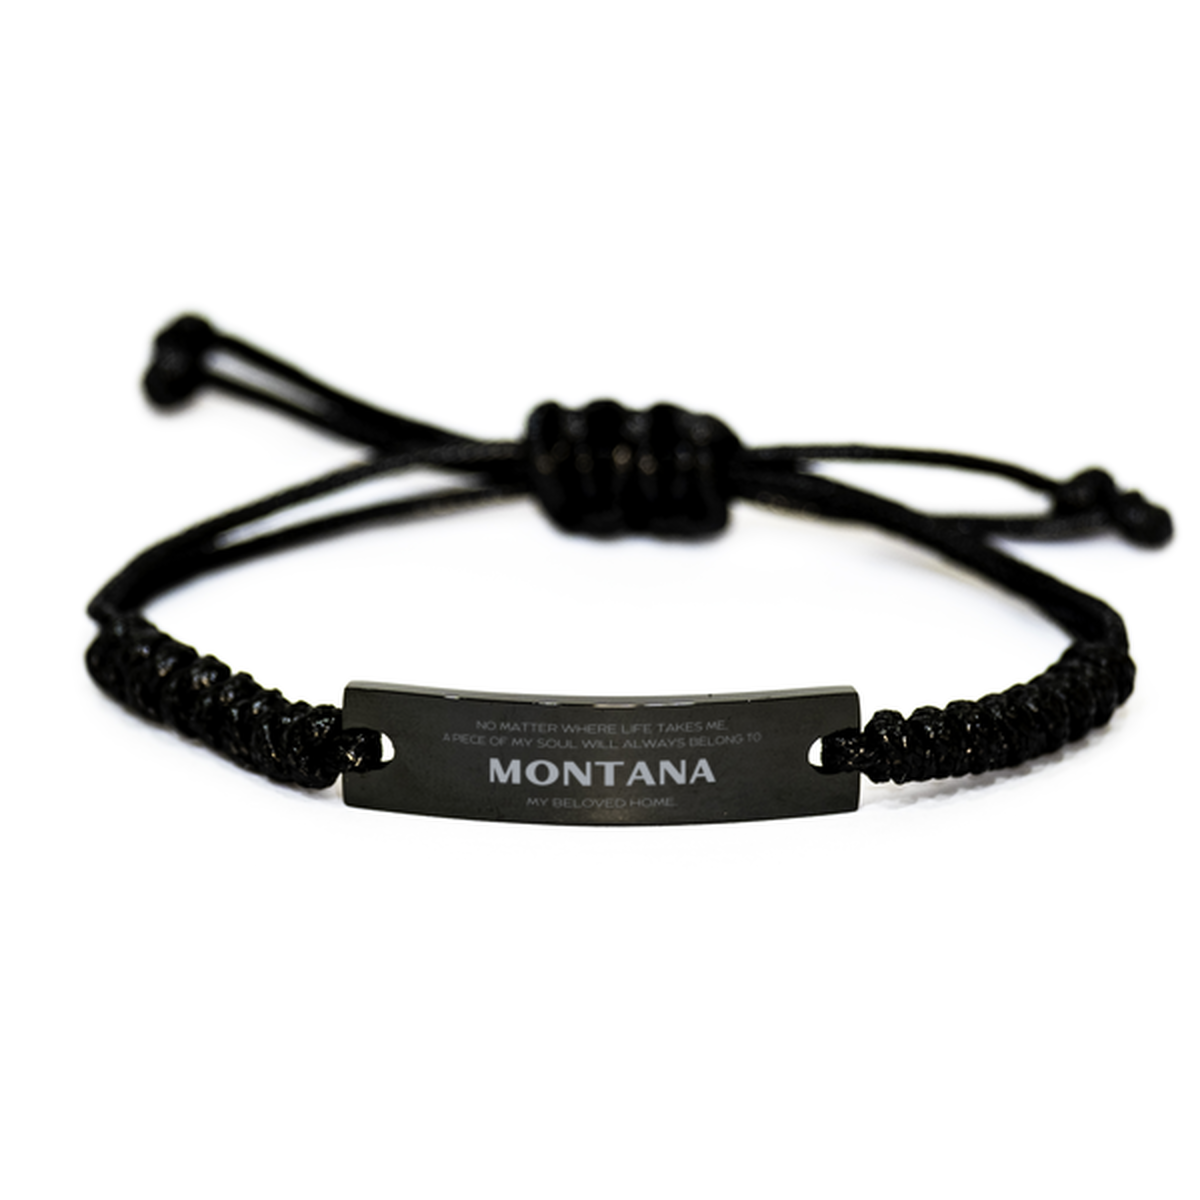 Love Montana State Gifts, My soul will always belong to Montana, Proud Black Rope Bracelet, Birthday Unique Gifts For Montana Men, Women, Friends